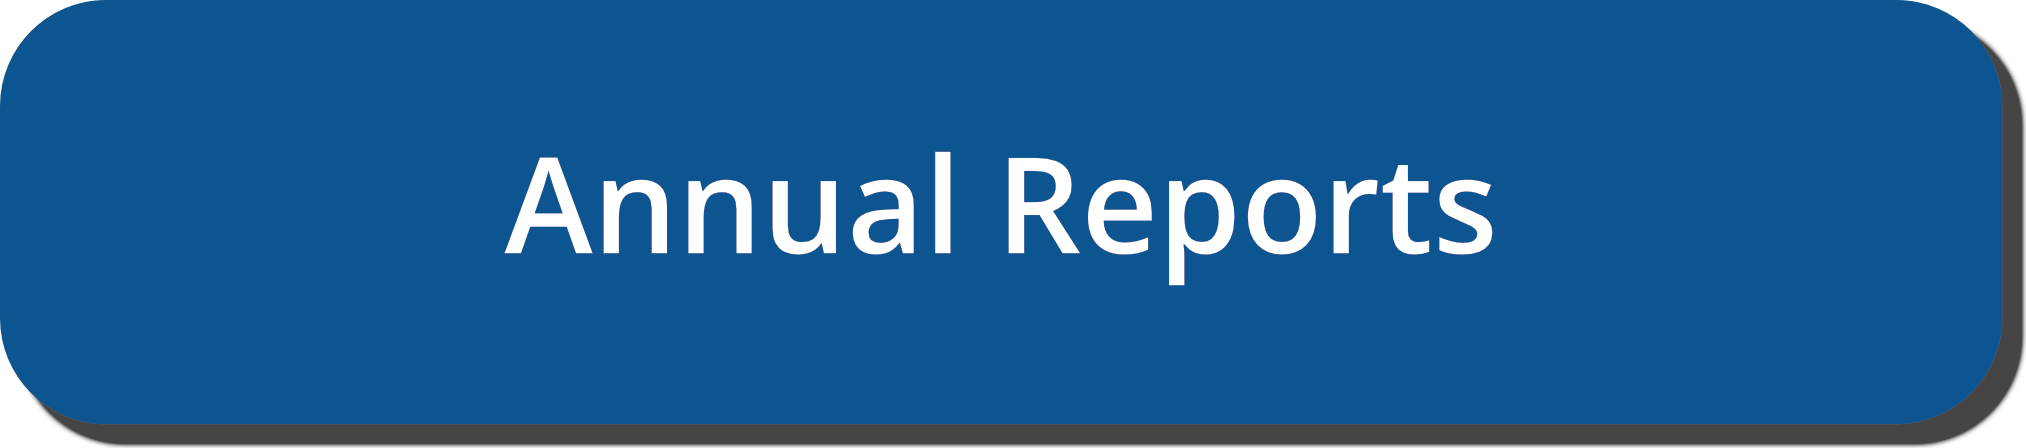 Annual Report Button Link